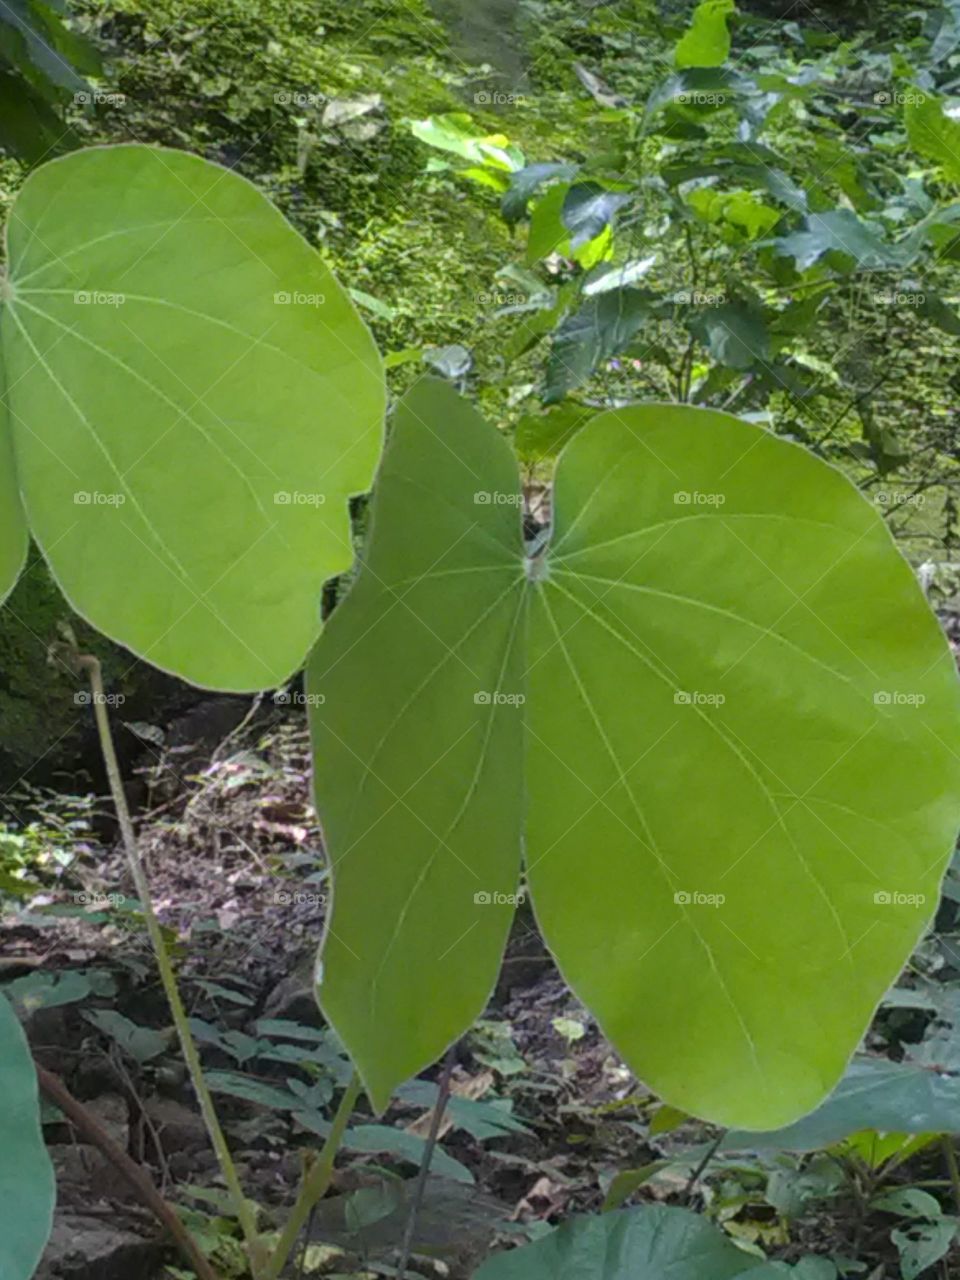 These leaves are very beautiful to look, but with this leaf, tribals make donna-leaflet (leaf plate) every year.